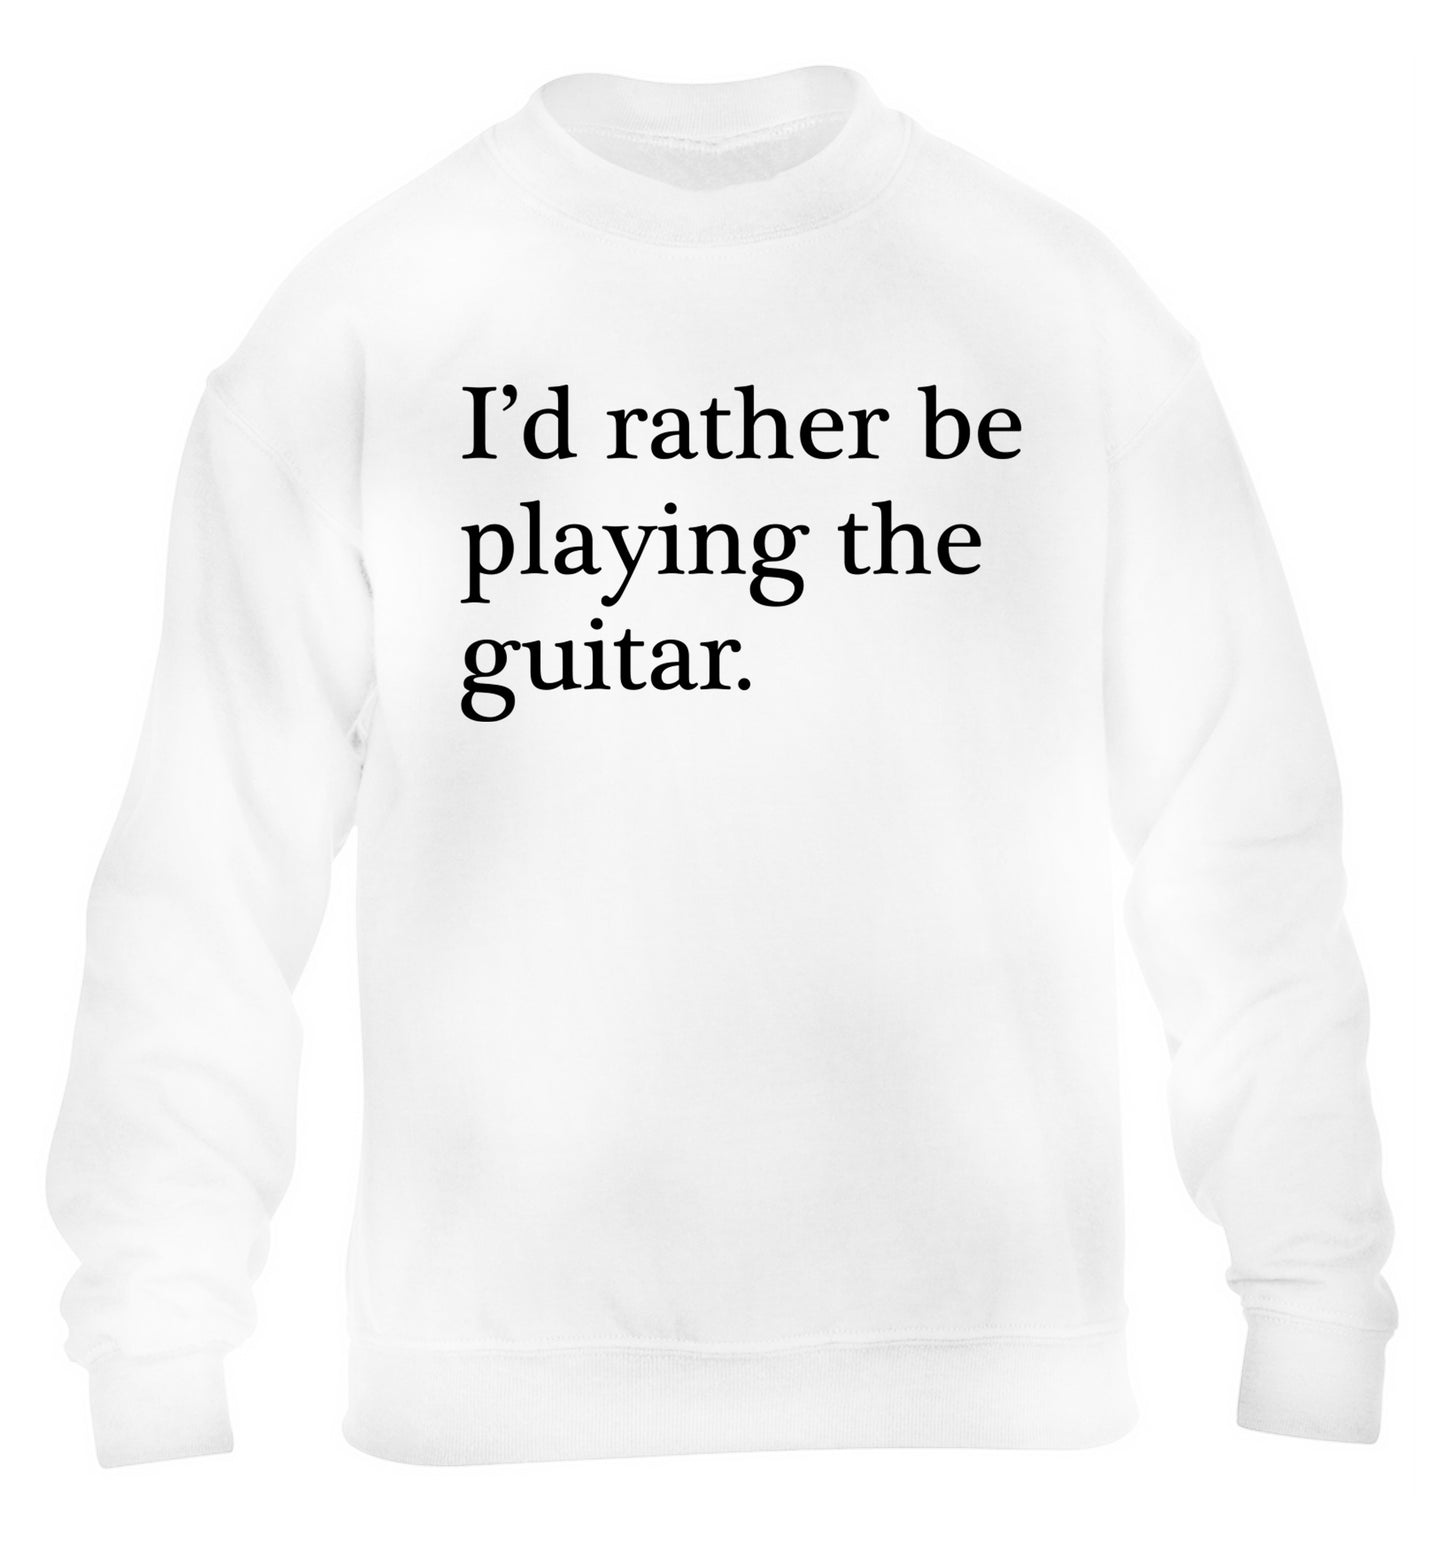 I'd rather be playing the guitar children's white sweater 12-14 Years